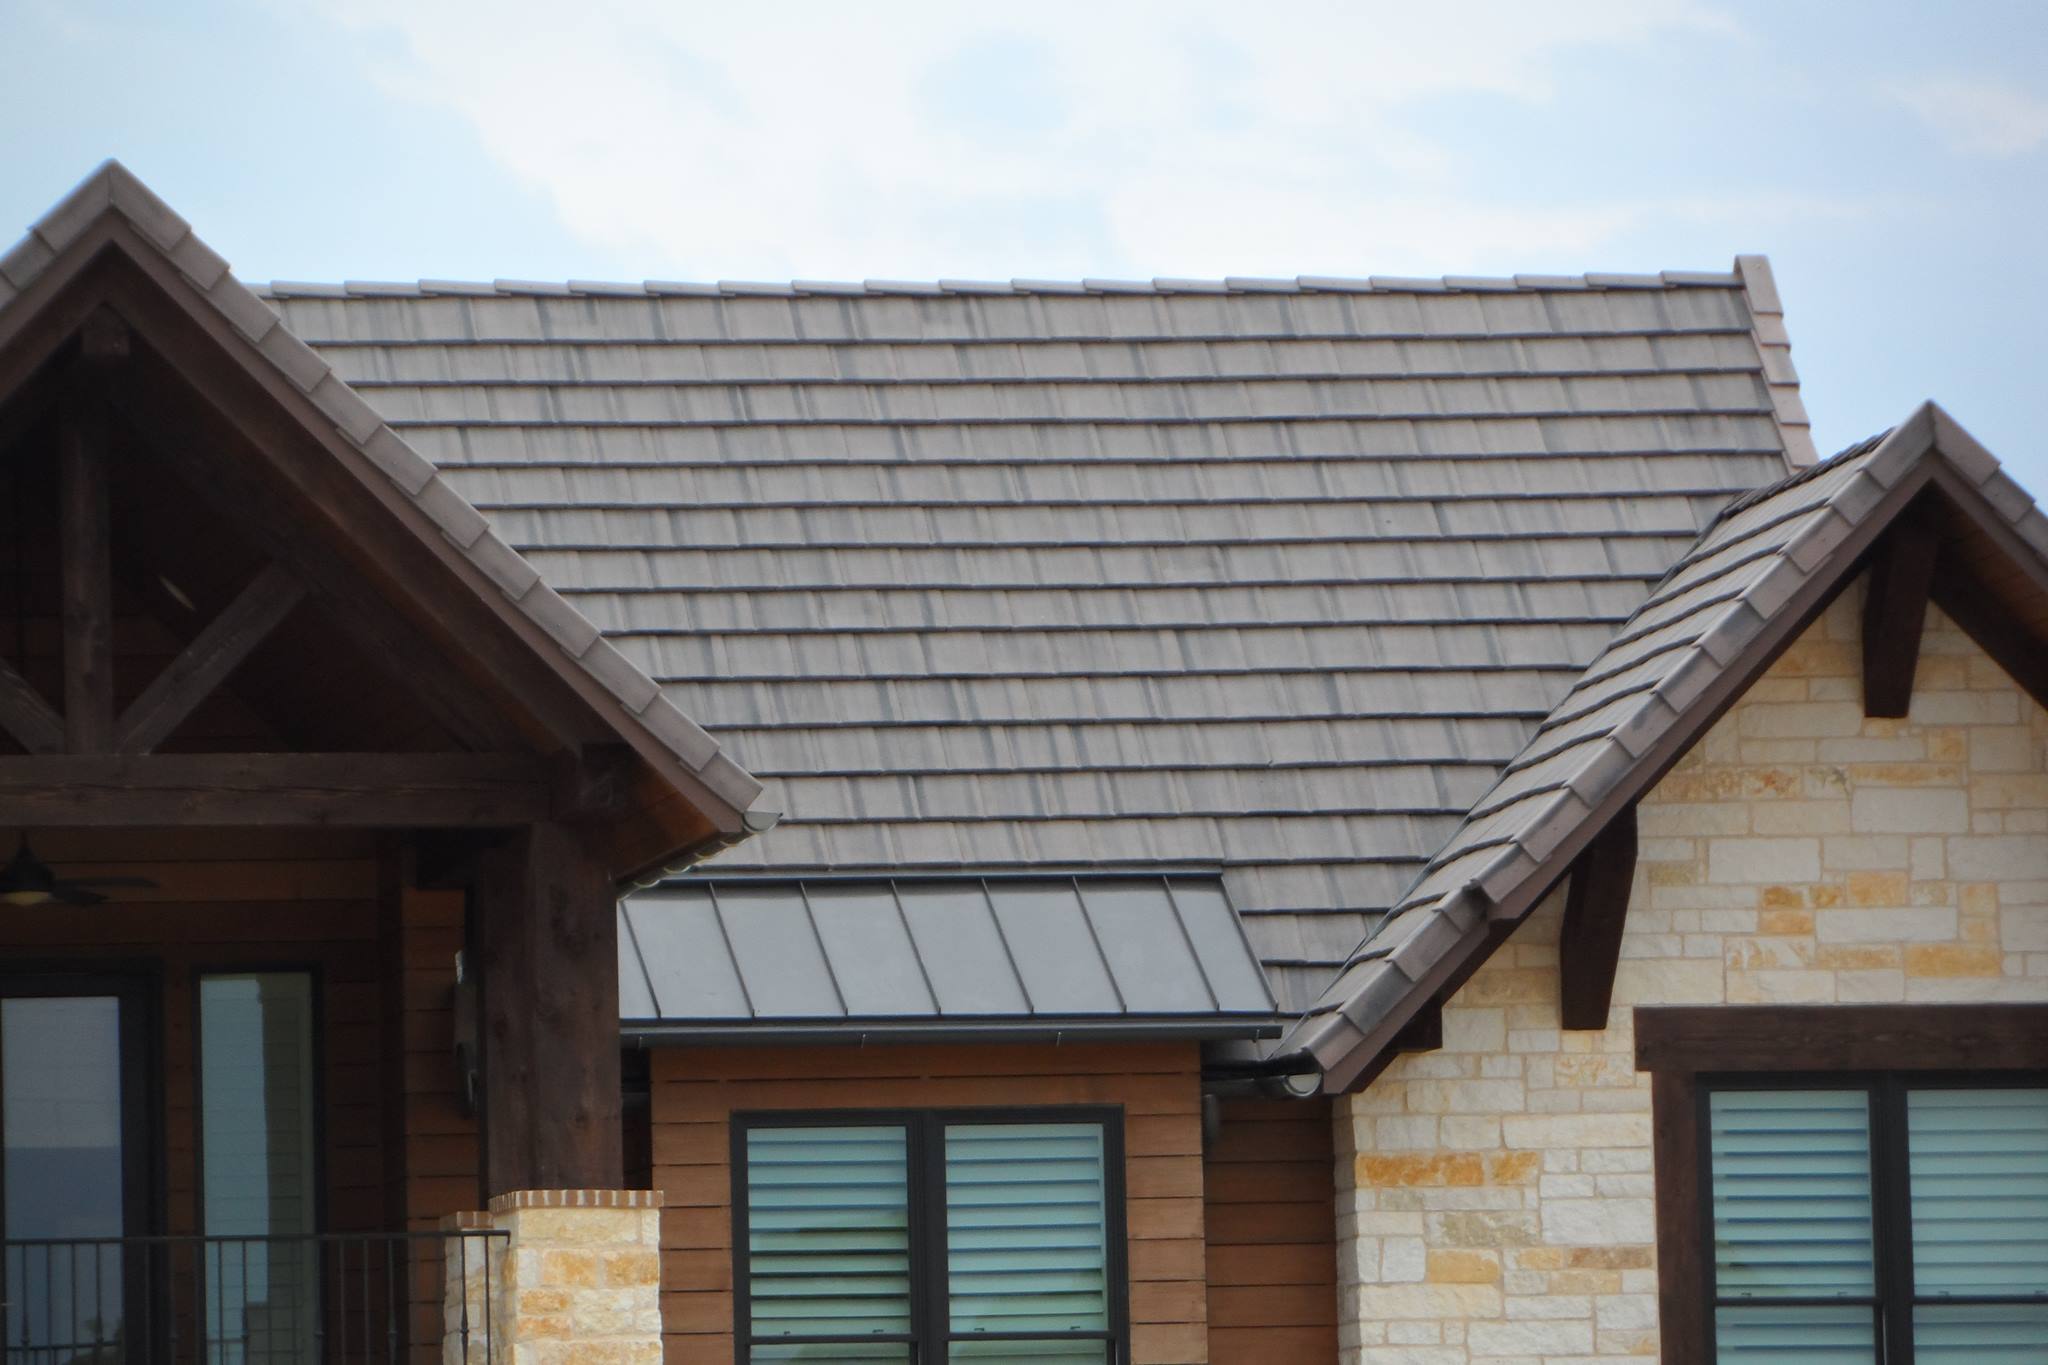 Mountain Style Home Caddetails, Crown Roof Tiles